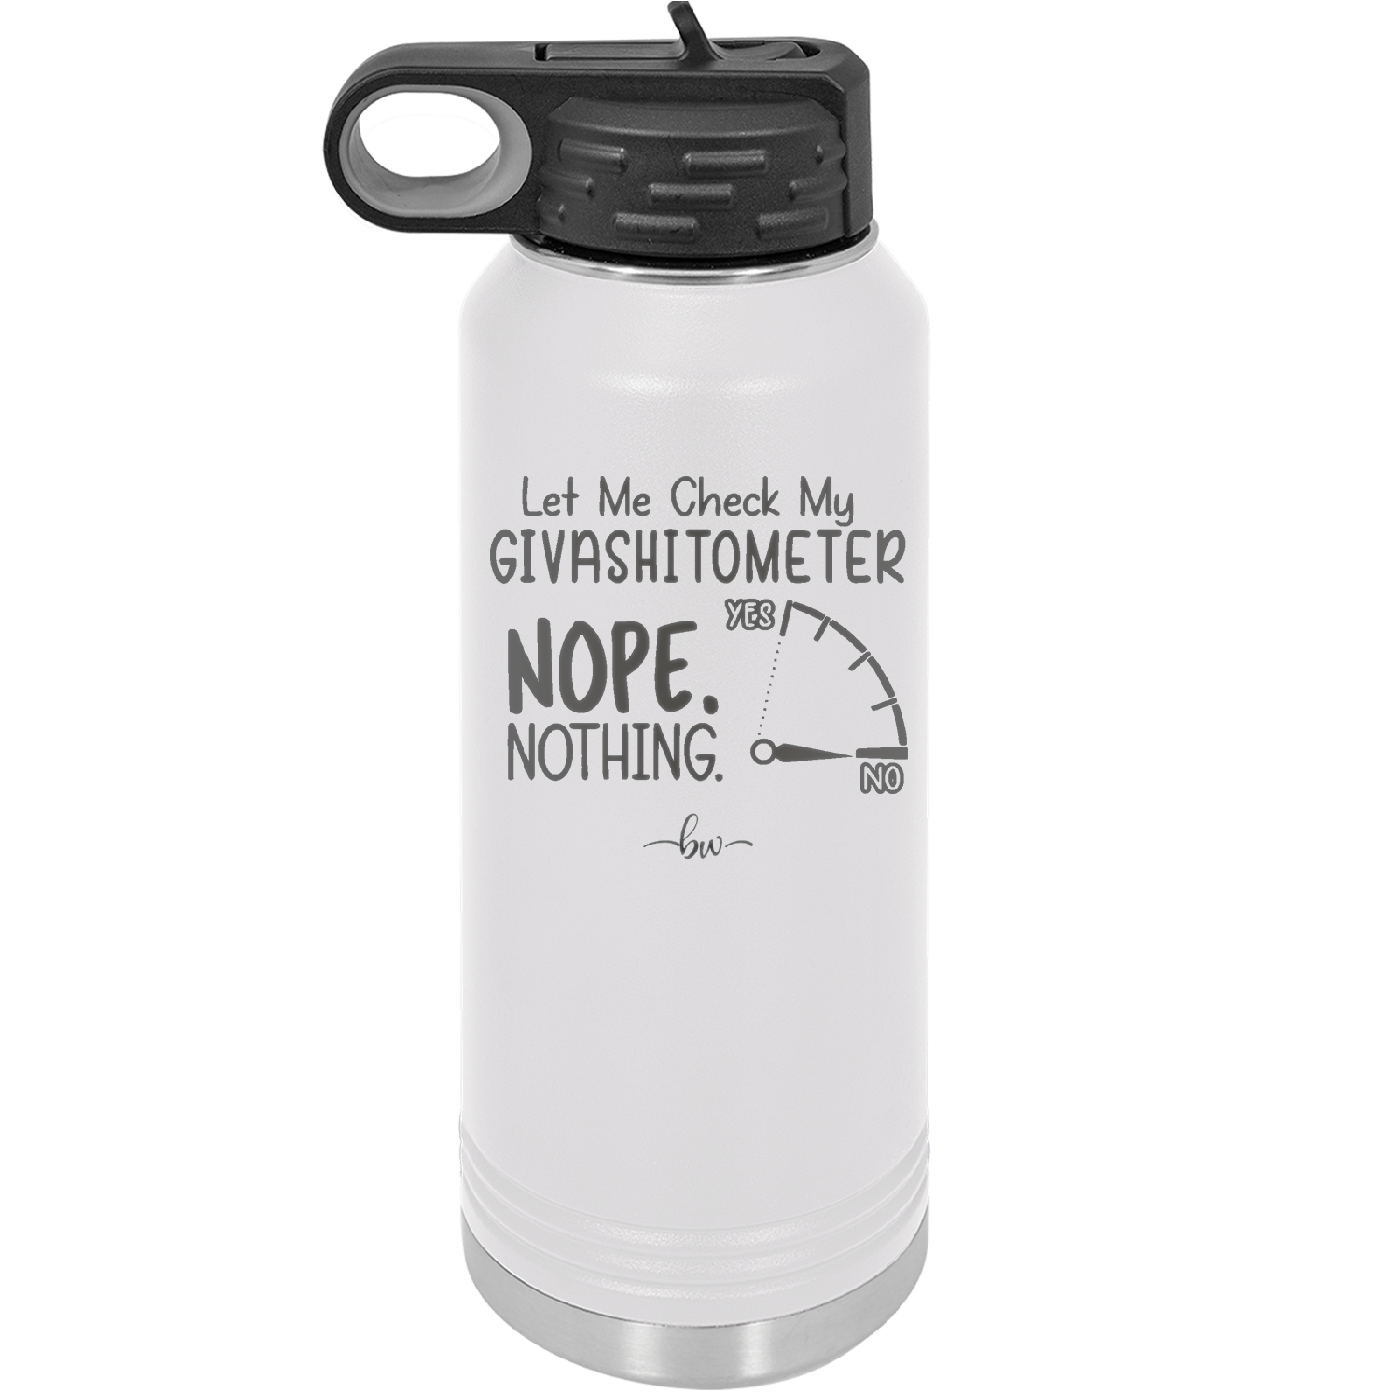 Let Me Check My GivashitOmeter Nope Nothing - Laser Engraved Stainless Steel Drinkware - 1339 -